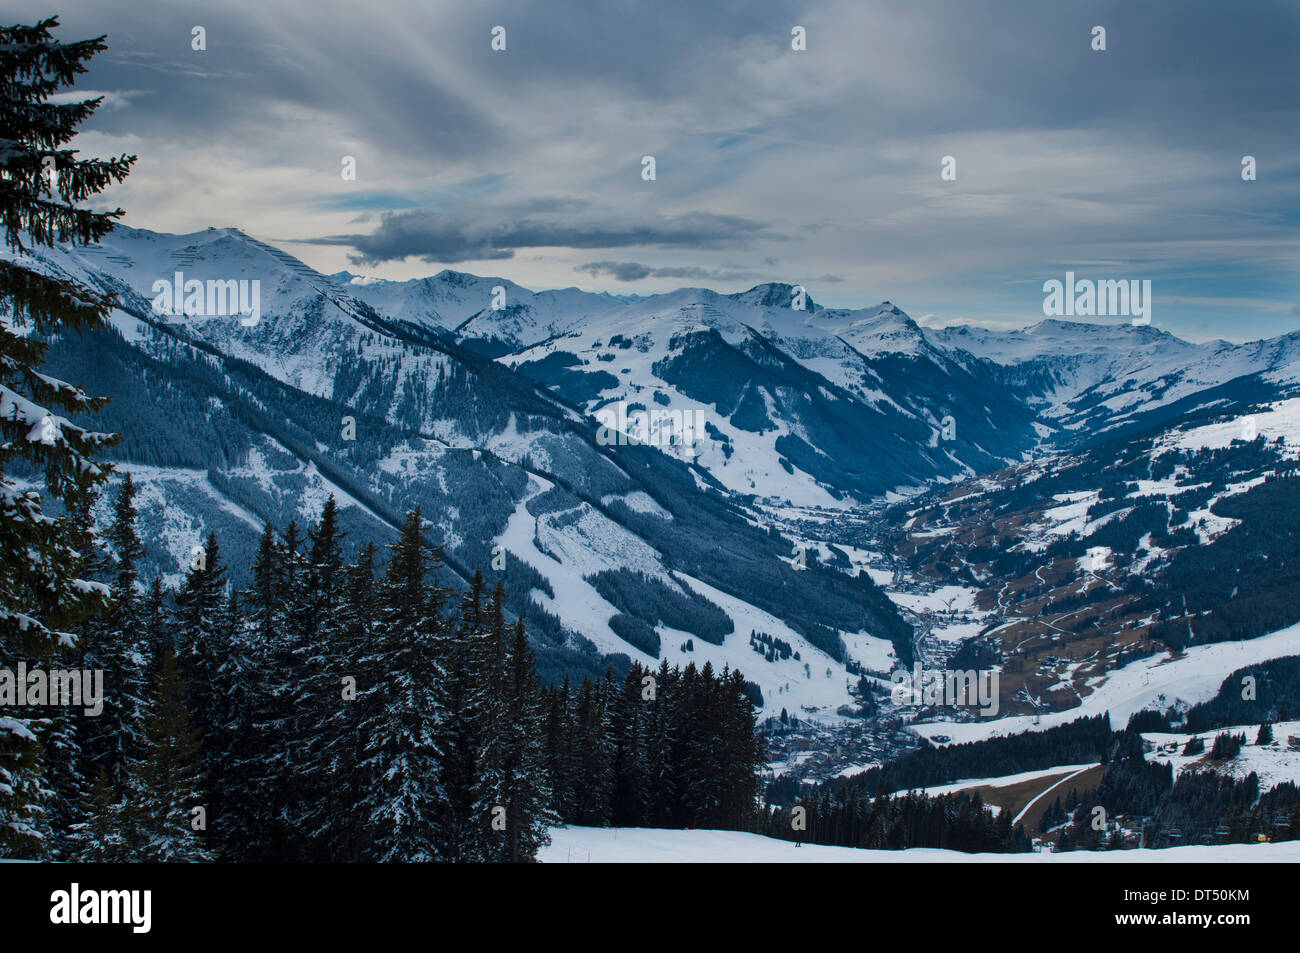 View to Austrian Ski resorts Saalbach and Hinterglemm nestling in an alpine valley, flanked by several peaks Stock Photo